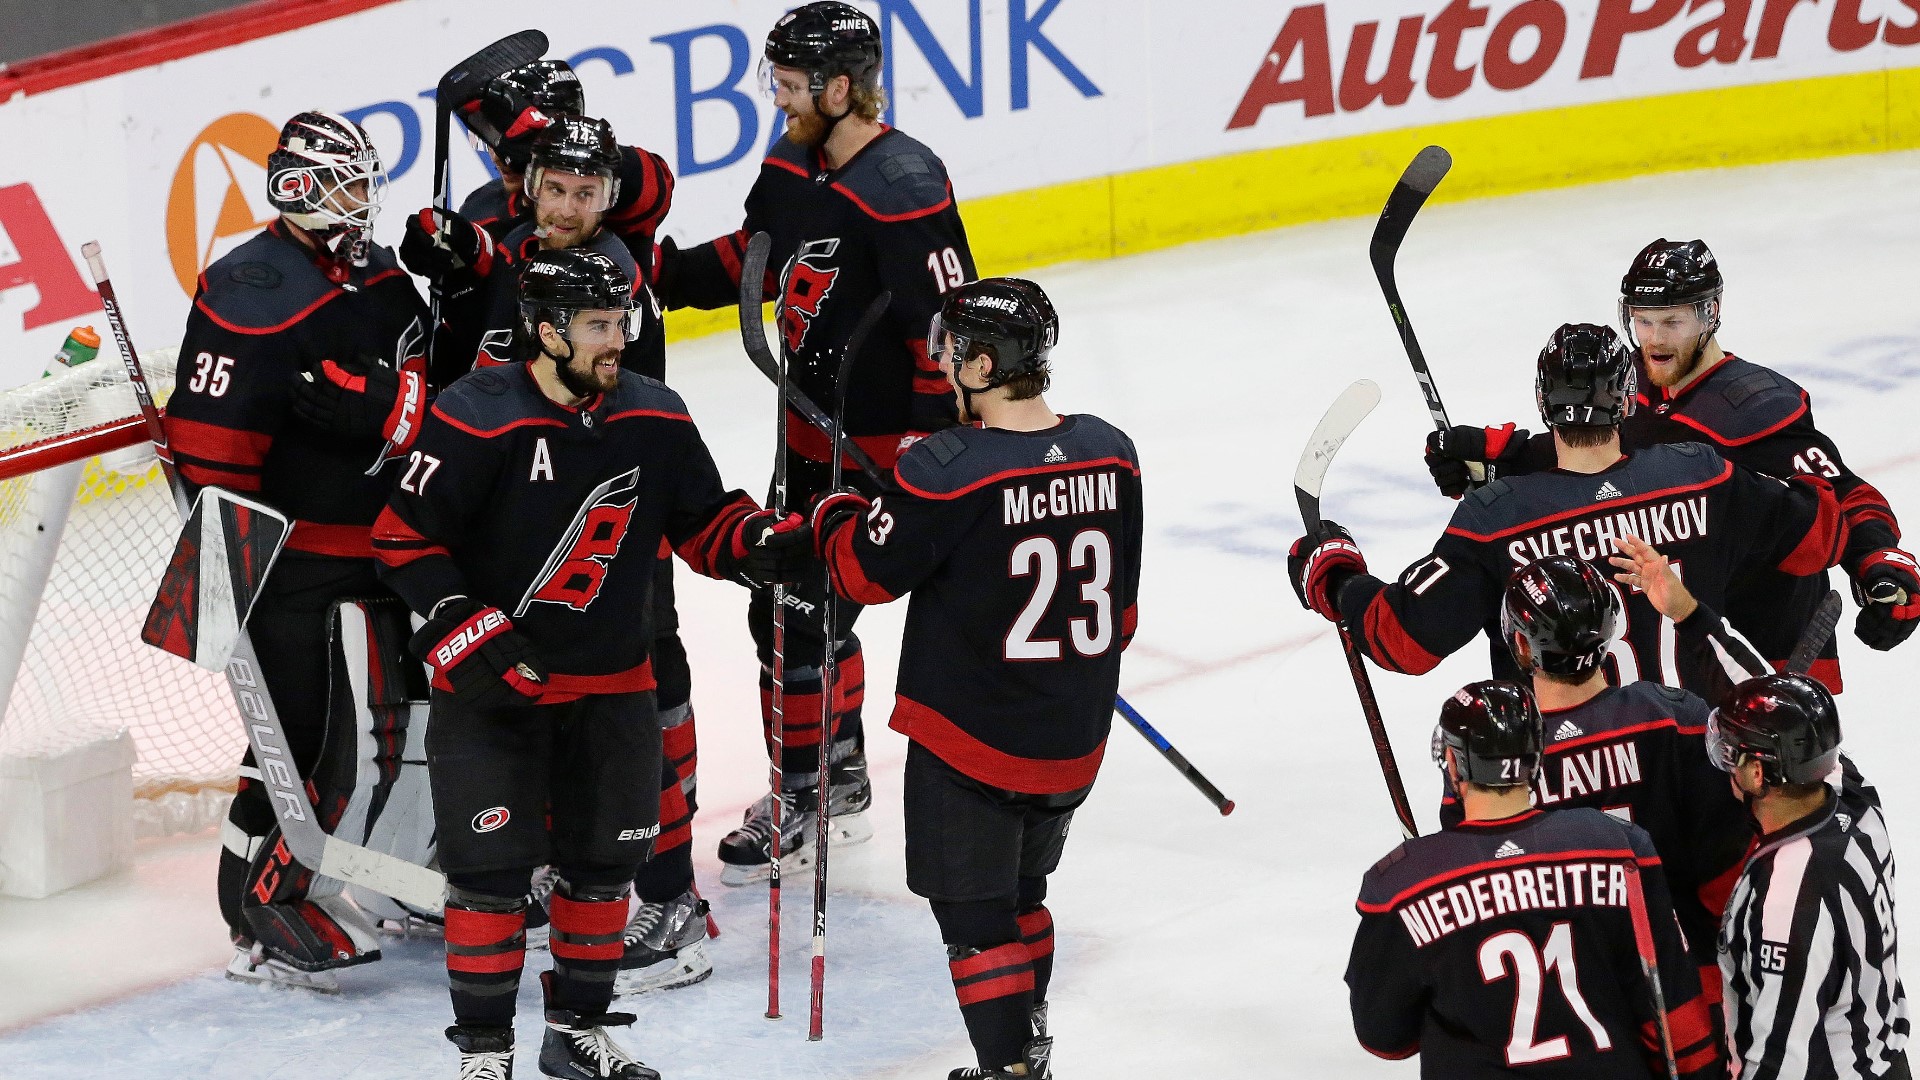 Carolina Hurricanes advanced to the Eastern Conference finals with 5-2 win and sweep of the NY Islanders Friday night at PNC Arena.